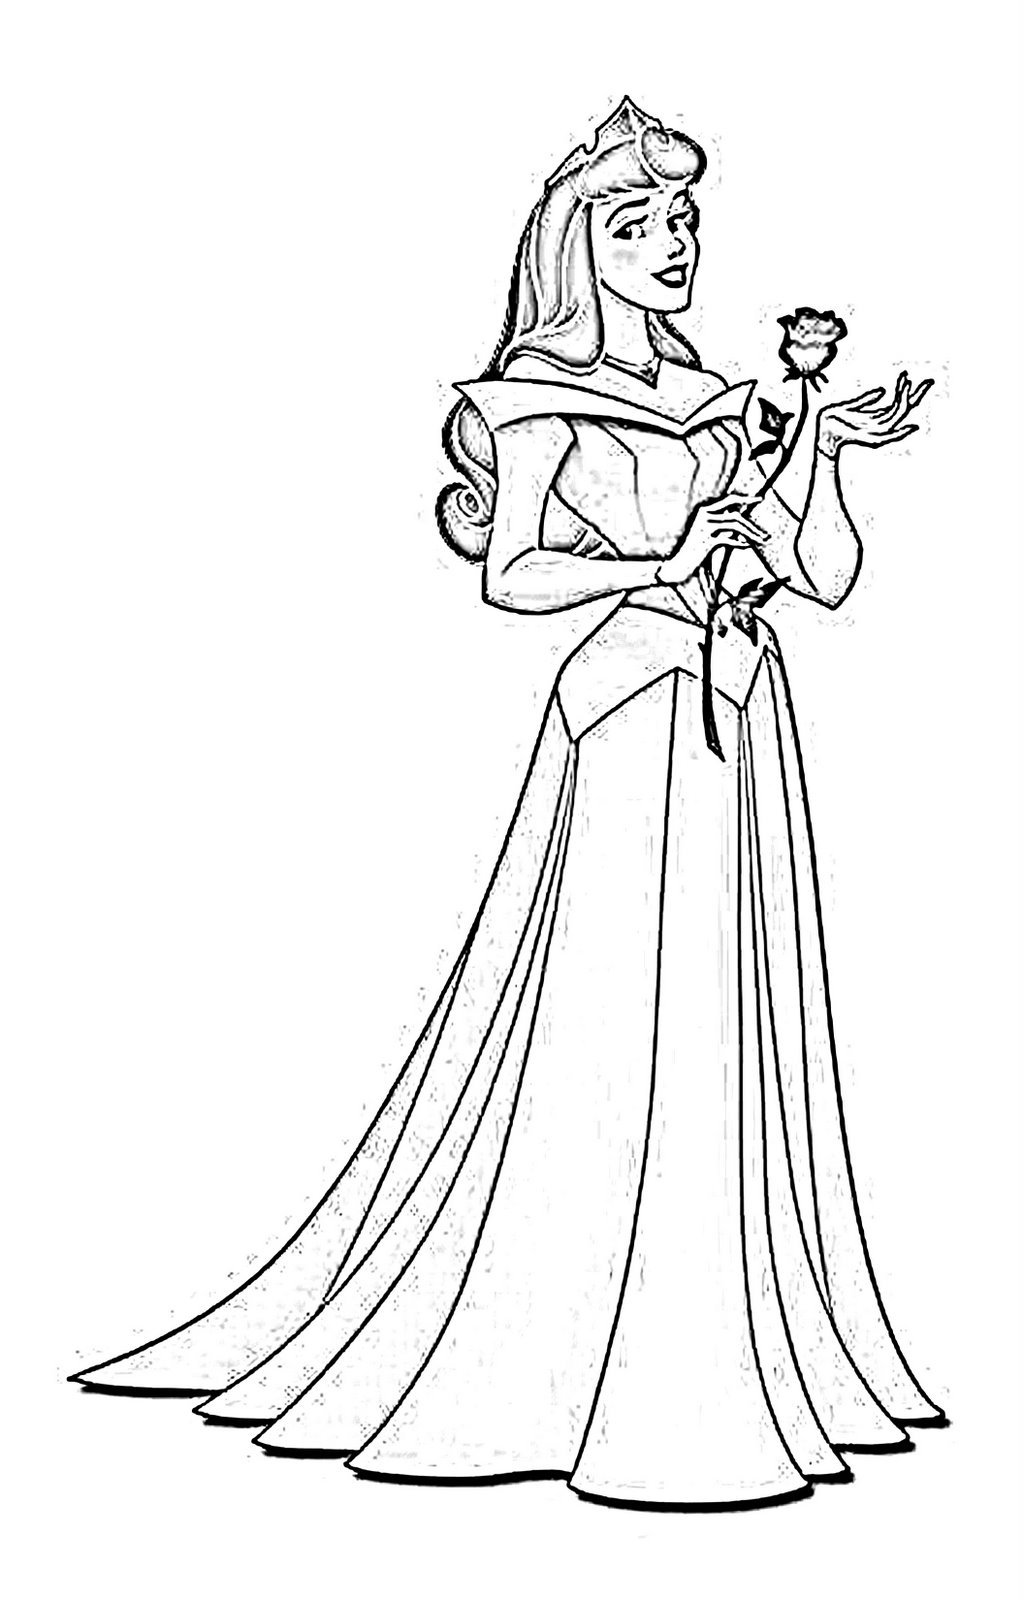 Download Princess Aurora Coloring Page - childrencoloring.us